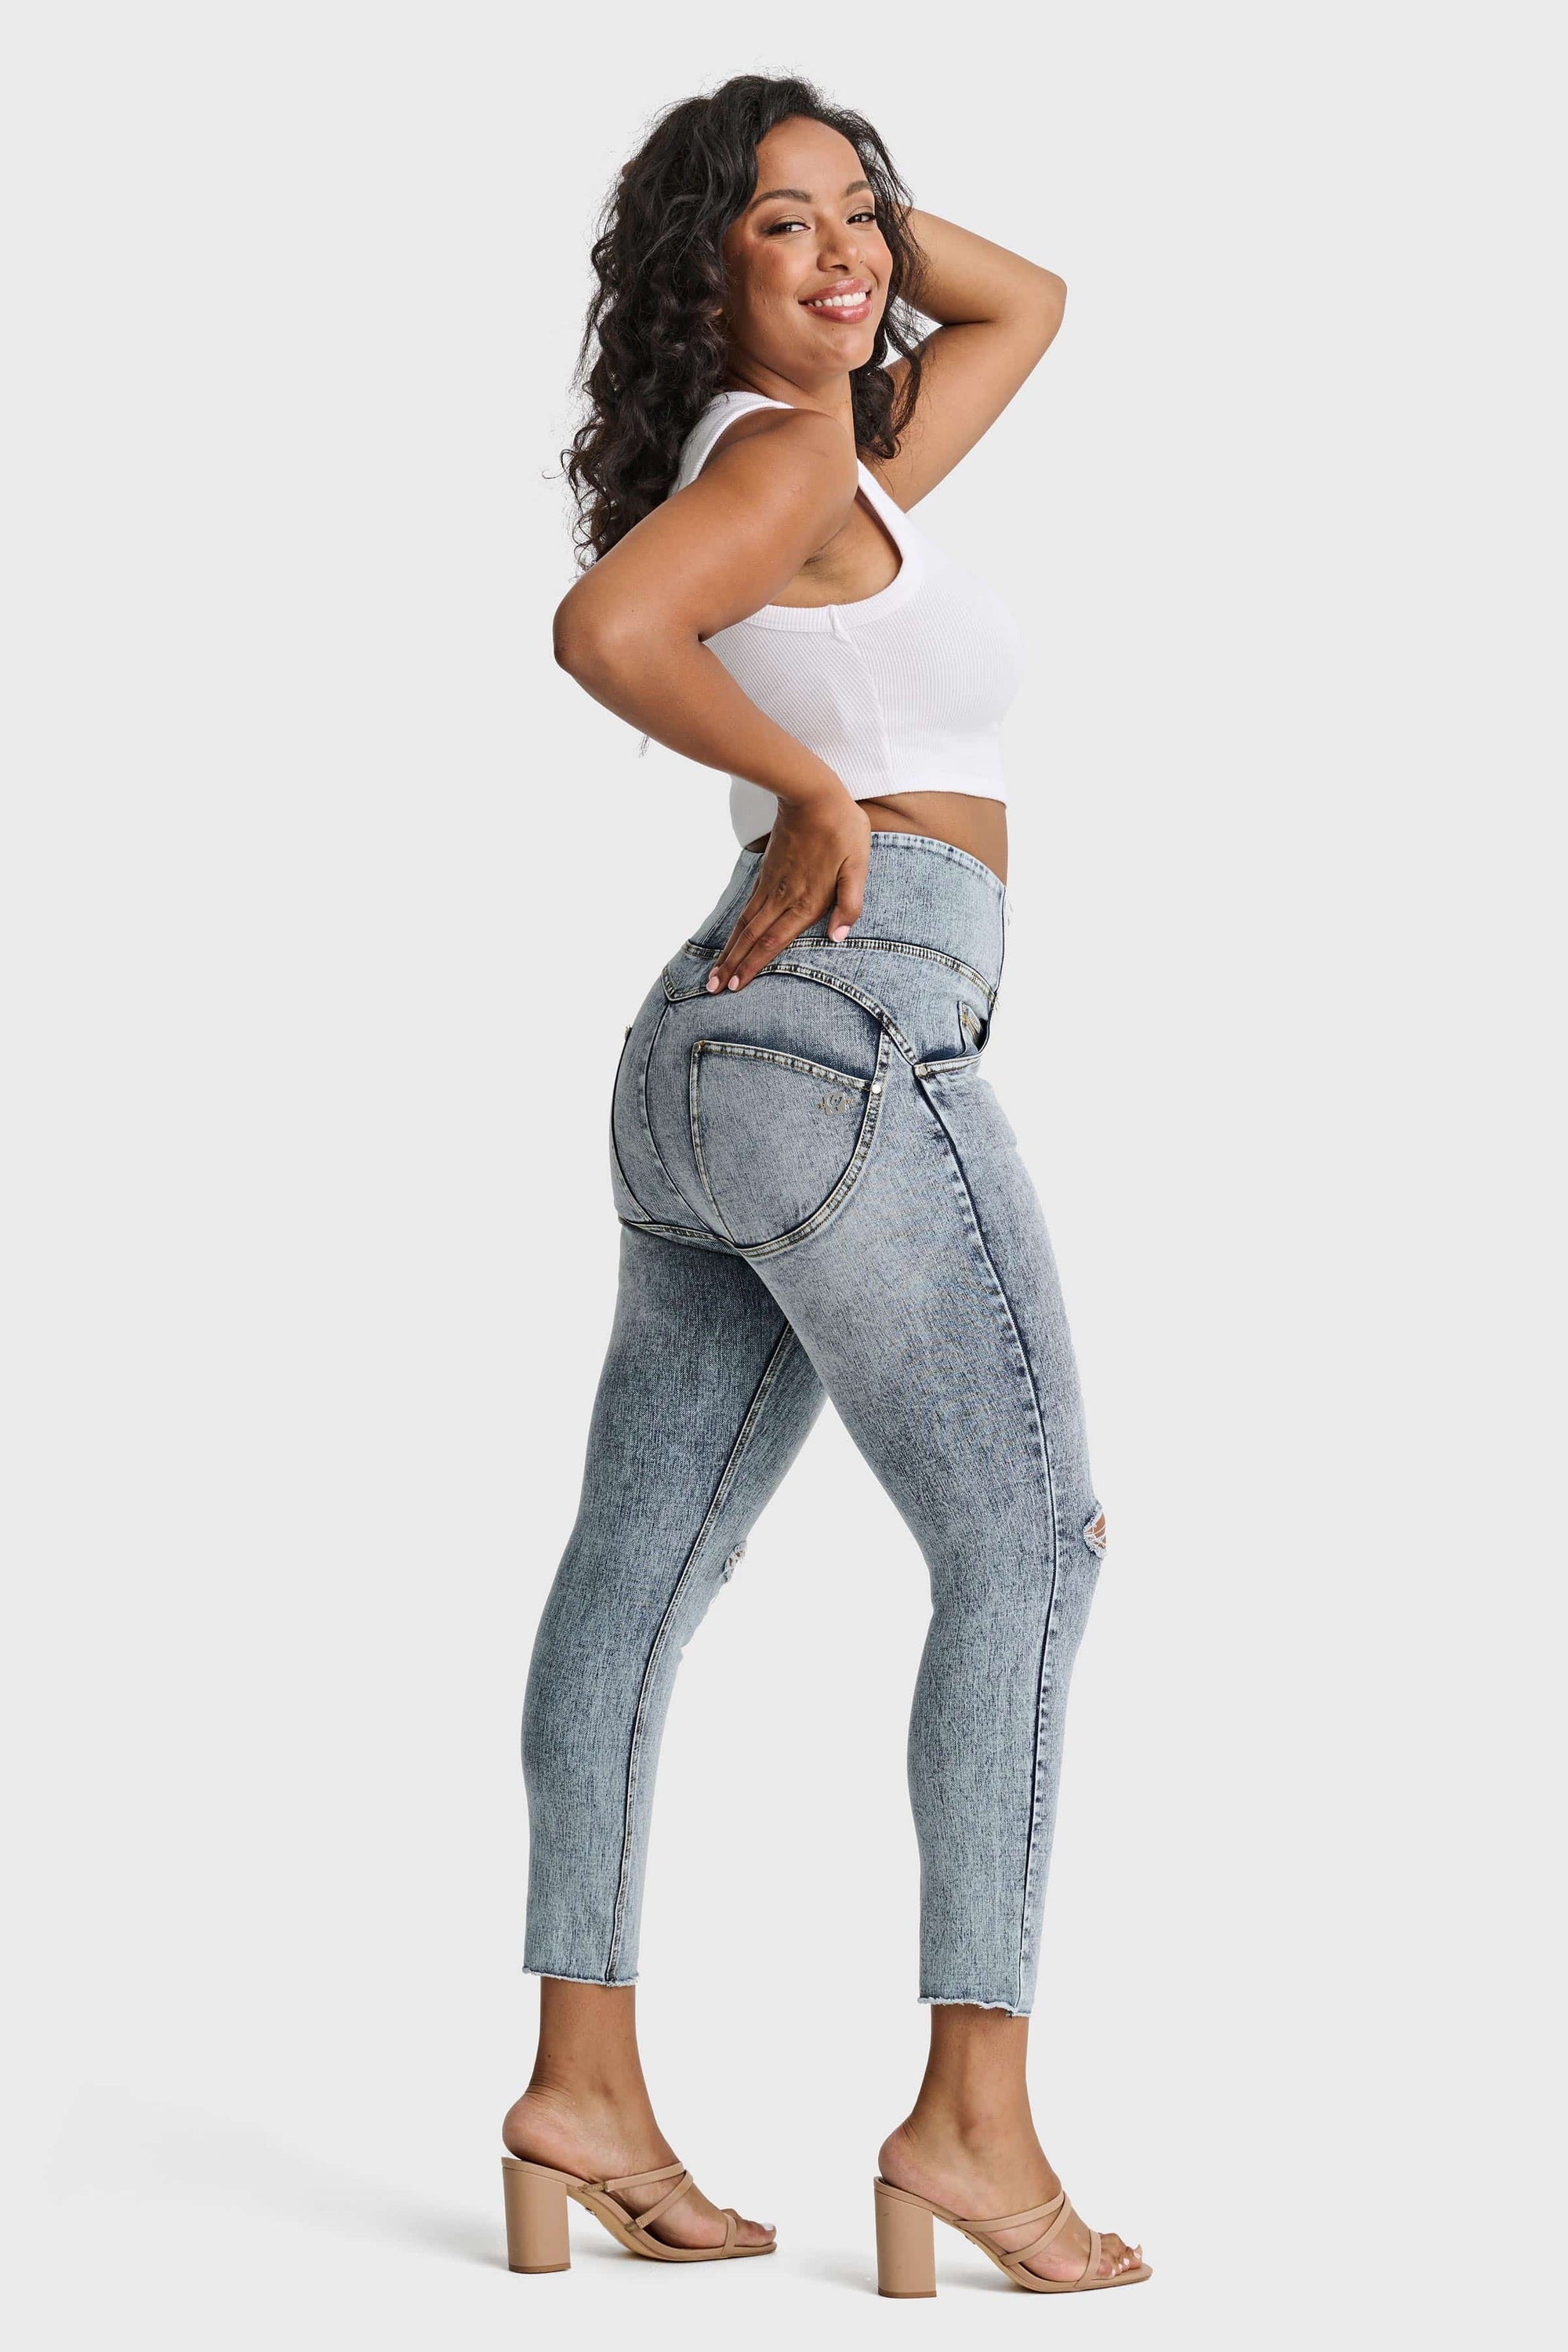 WR.UP® Snug Curvy Ripped Jeans - High Waisted - Petite Length - Blue Stonewash + Yellow Stitching 6